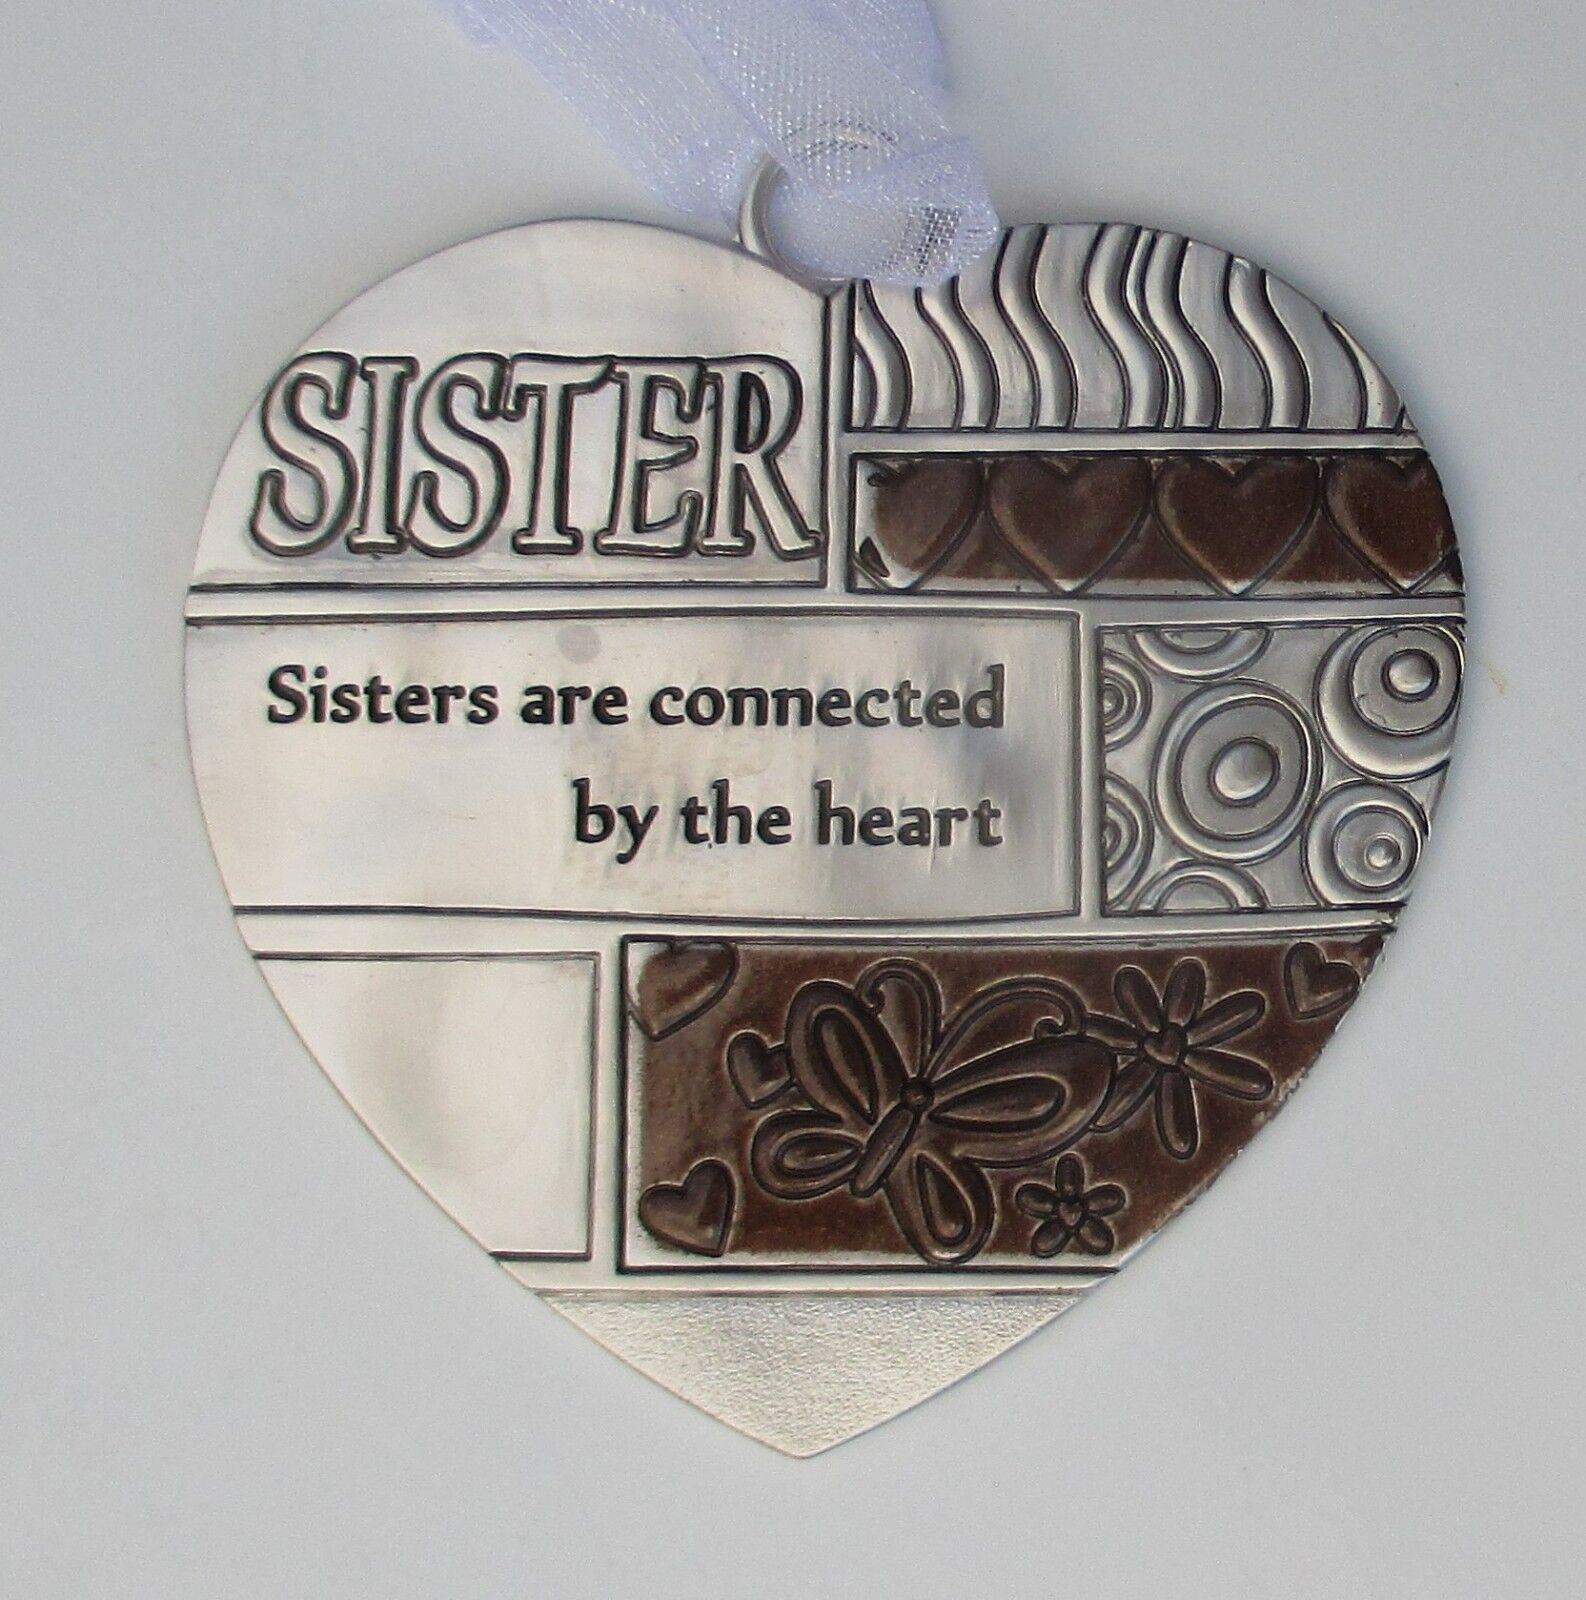 2CCD Sister sisters are connected by the heart LOVE HEART ORNAMENT Ganz